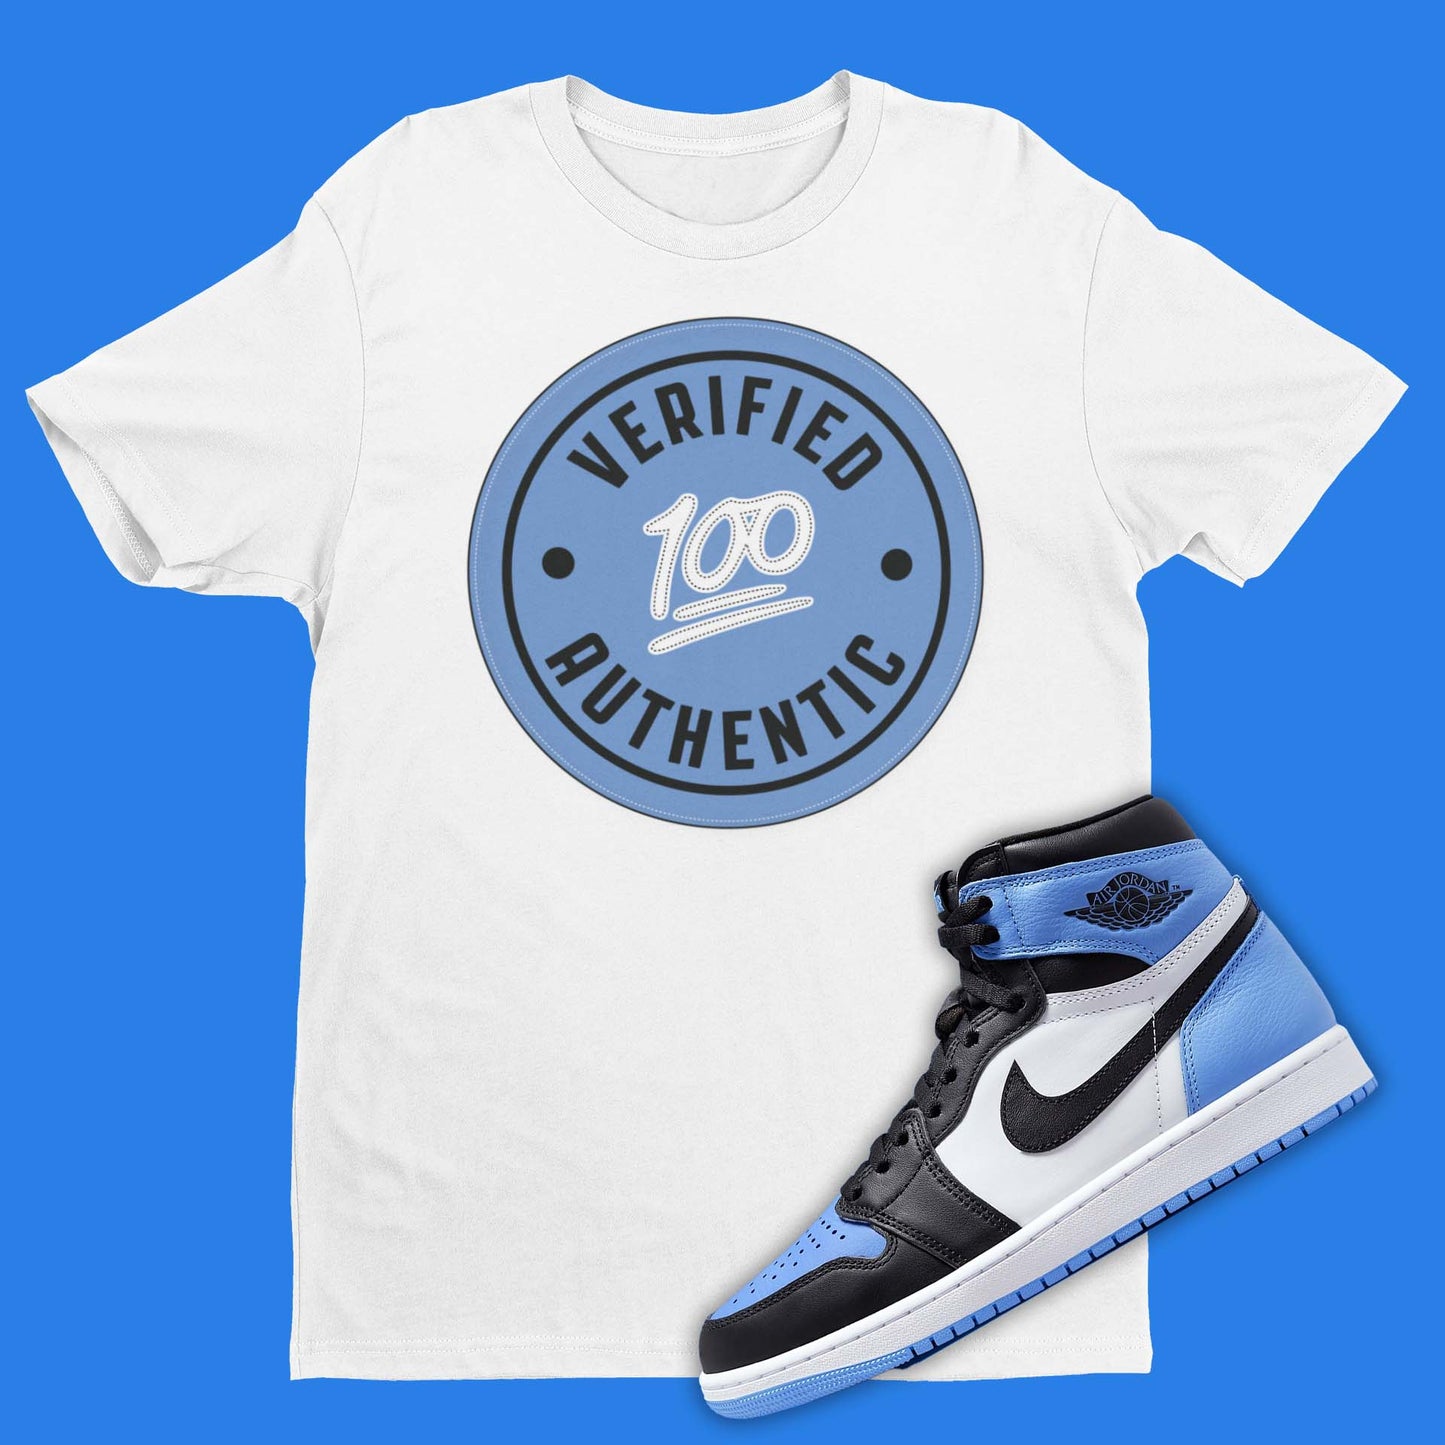 Air Jordan 1 Retro High OG UNC Toe inspired t-shirt with authentication tag on the front and 100 emoji